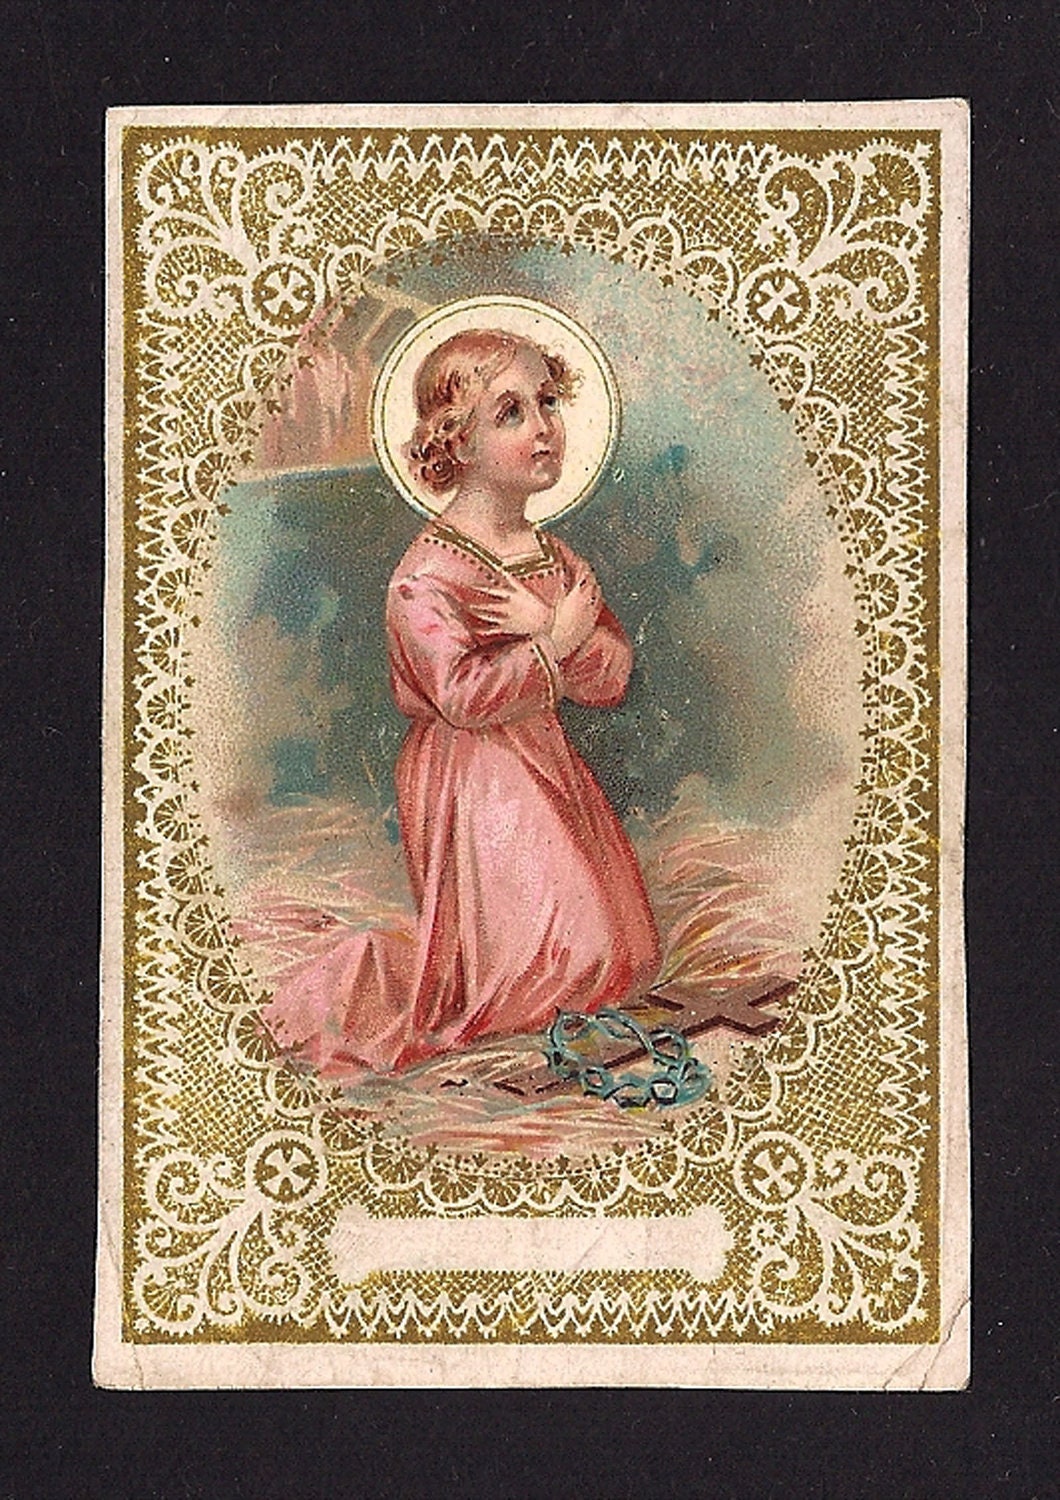 Antique Holy Cards